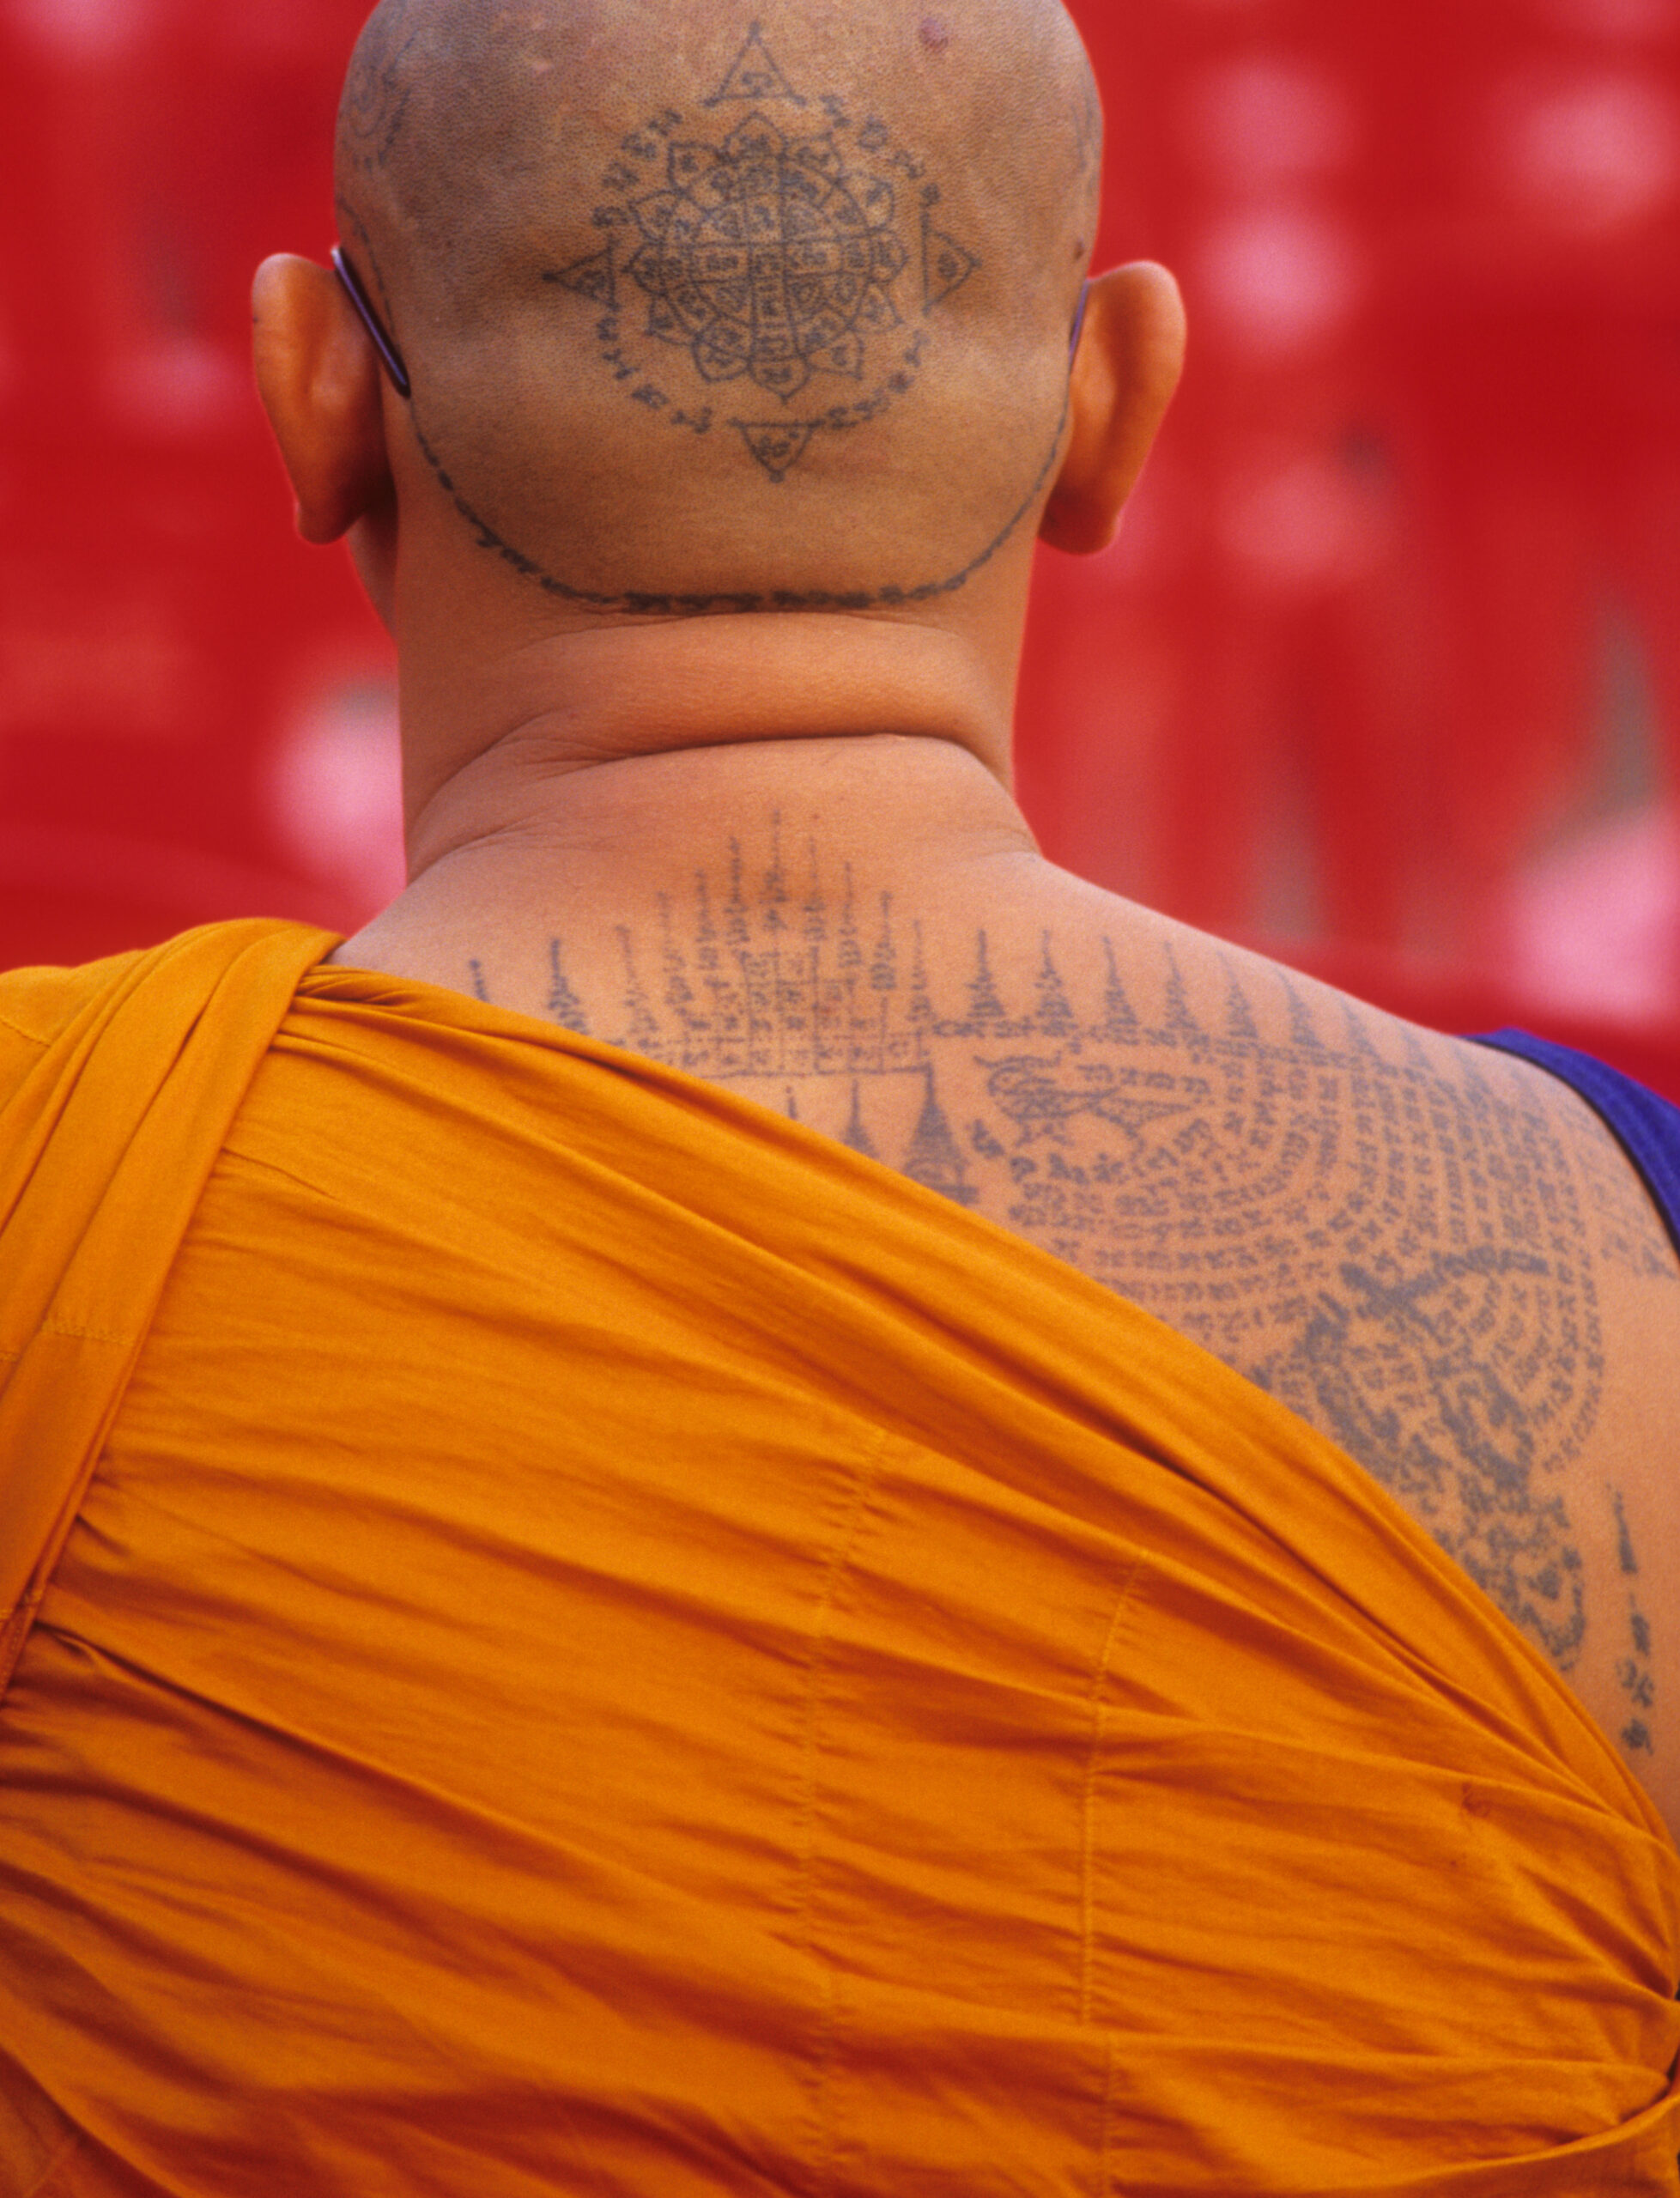 This Theravada Buddhist monk of Wat Bang Phra in Thailand has a sacred Mongkut Phra Puttha Chao yantra tattooed on his head, believed to impart prosperity, protection, and luck. Photograph by Lars Krutak.